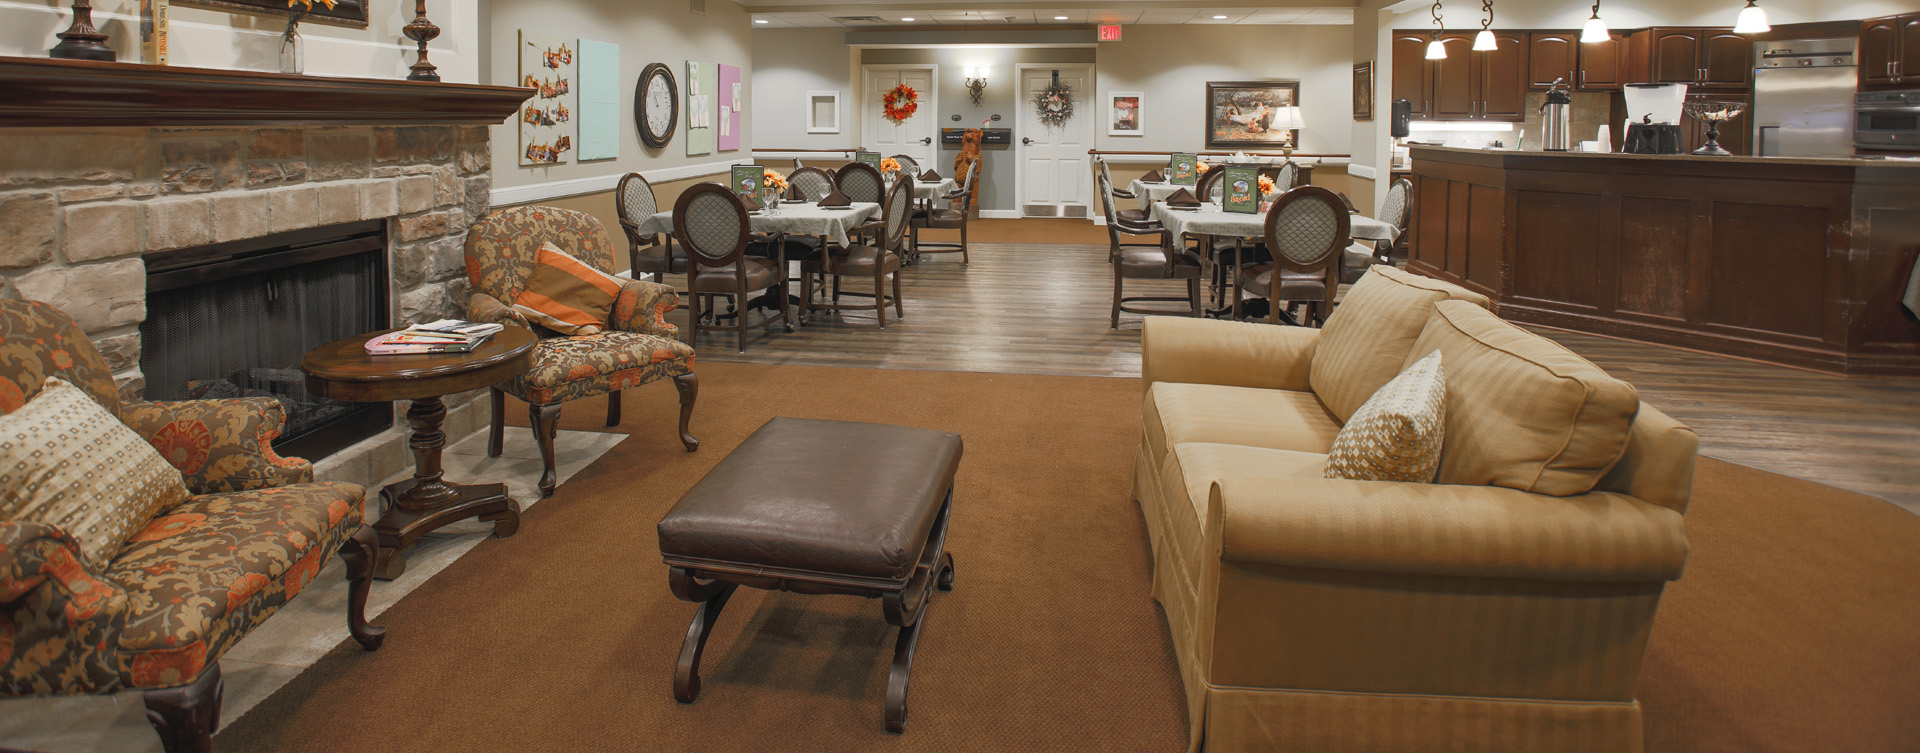 Chairs and sofas sit higher and are easier to get in and out of in the Mary B’s living room at Bickford of Carmel